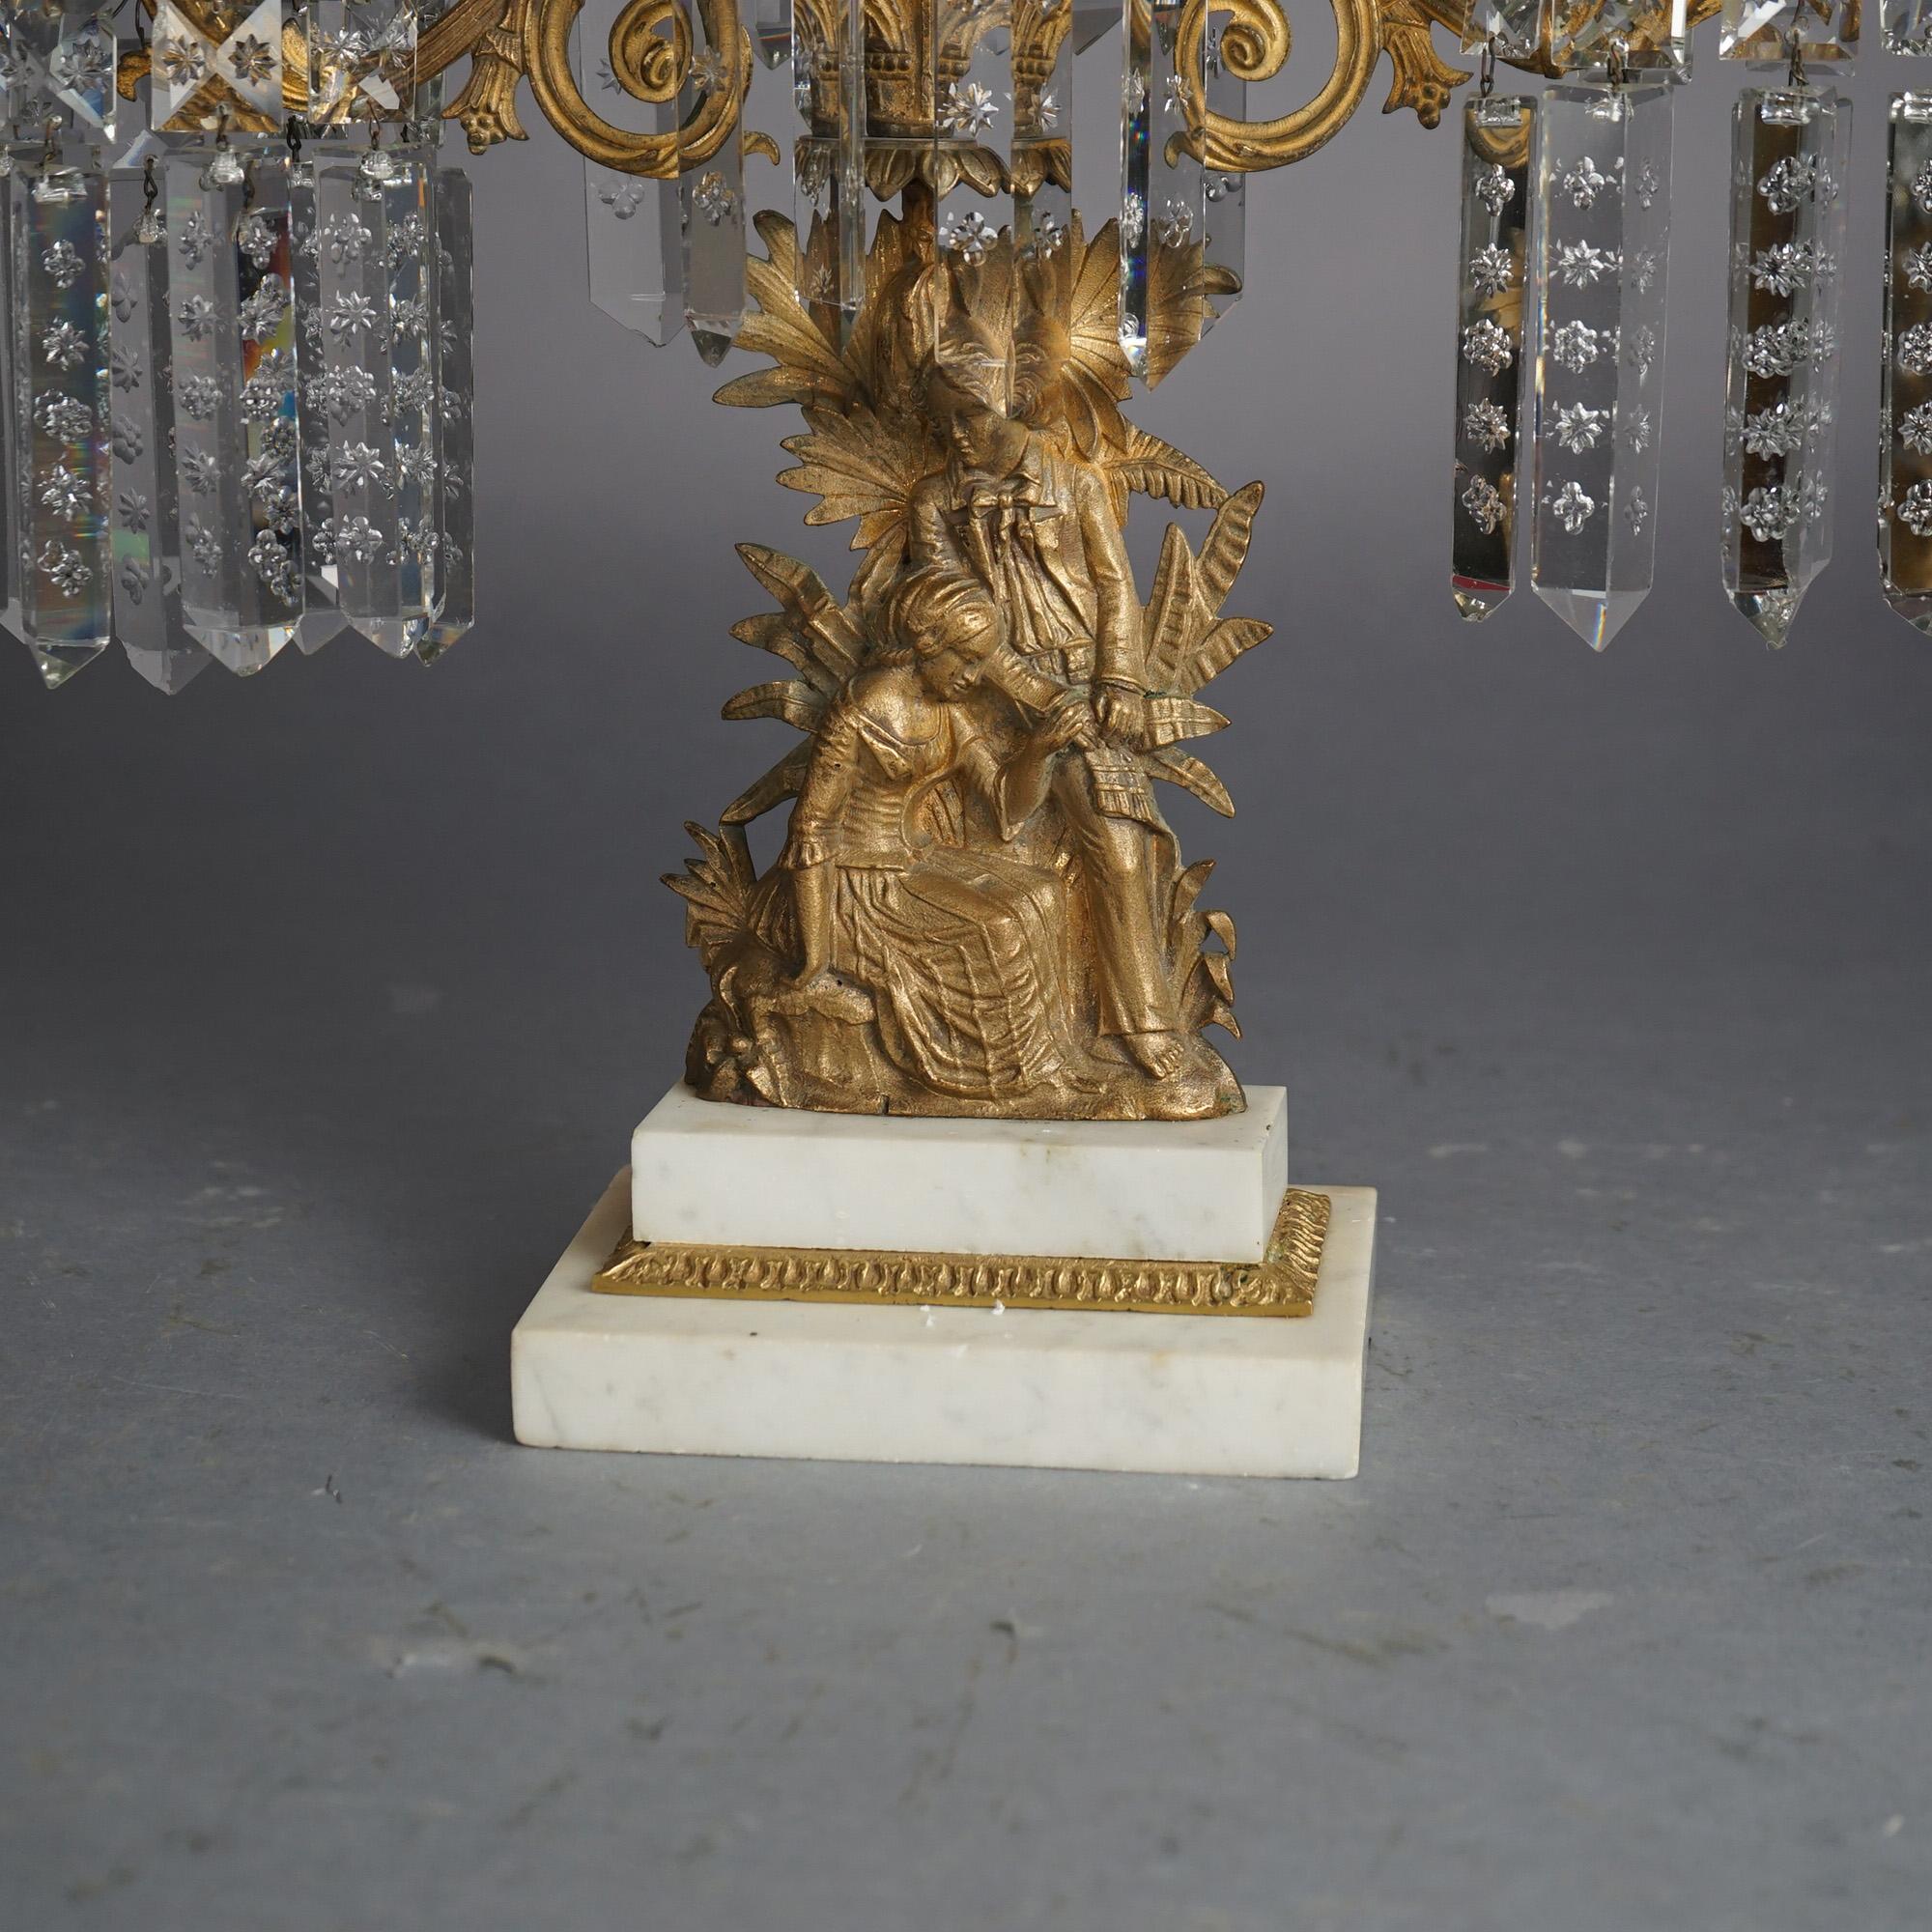 An antique set of American girandoles offer gilt cast bronze frames in the form of a courting couple (woman with an Anglo-Indian man) in countryside setting with hanging crystal prisms and stepped marble bases, c1880

Measures- Pair of Candelabras: